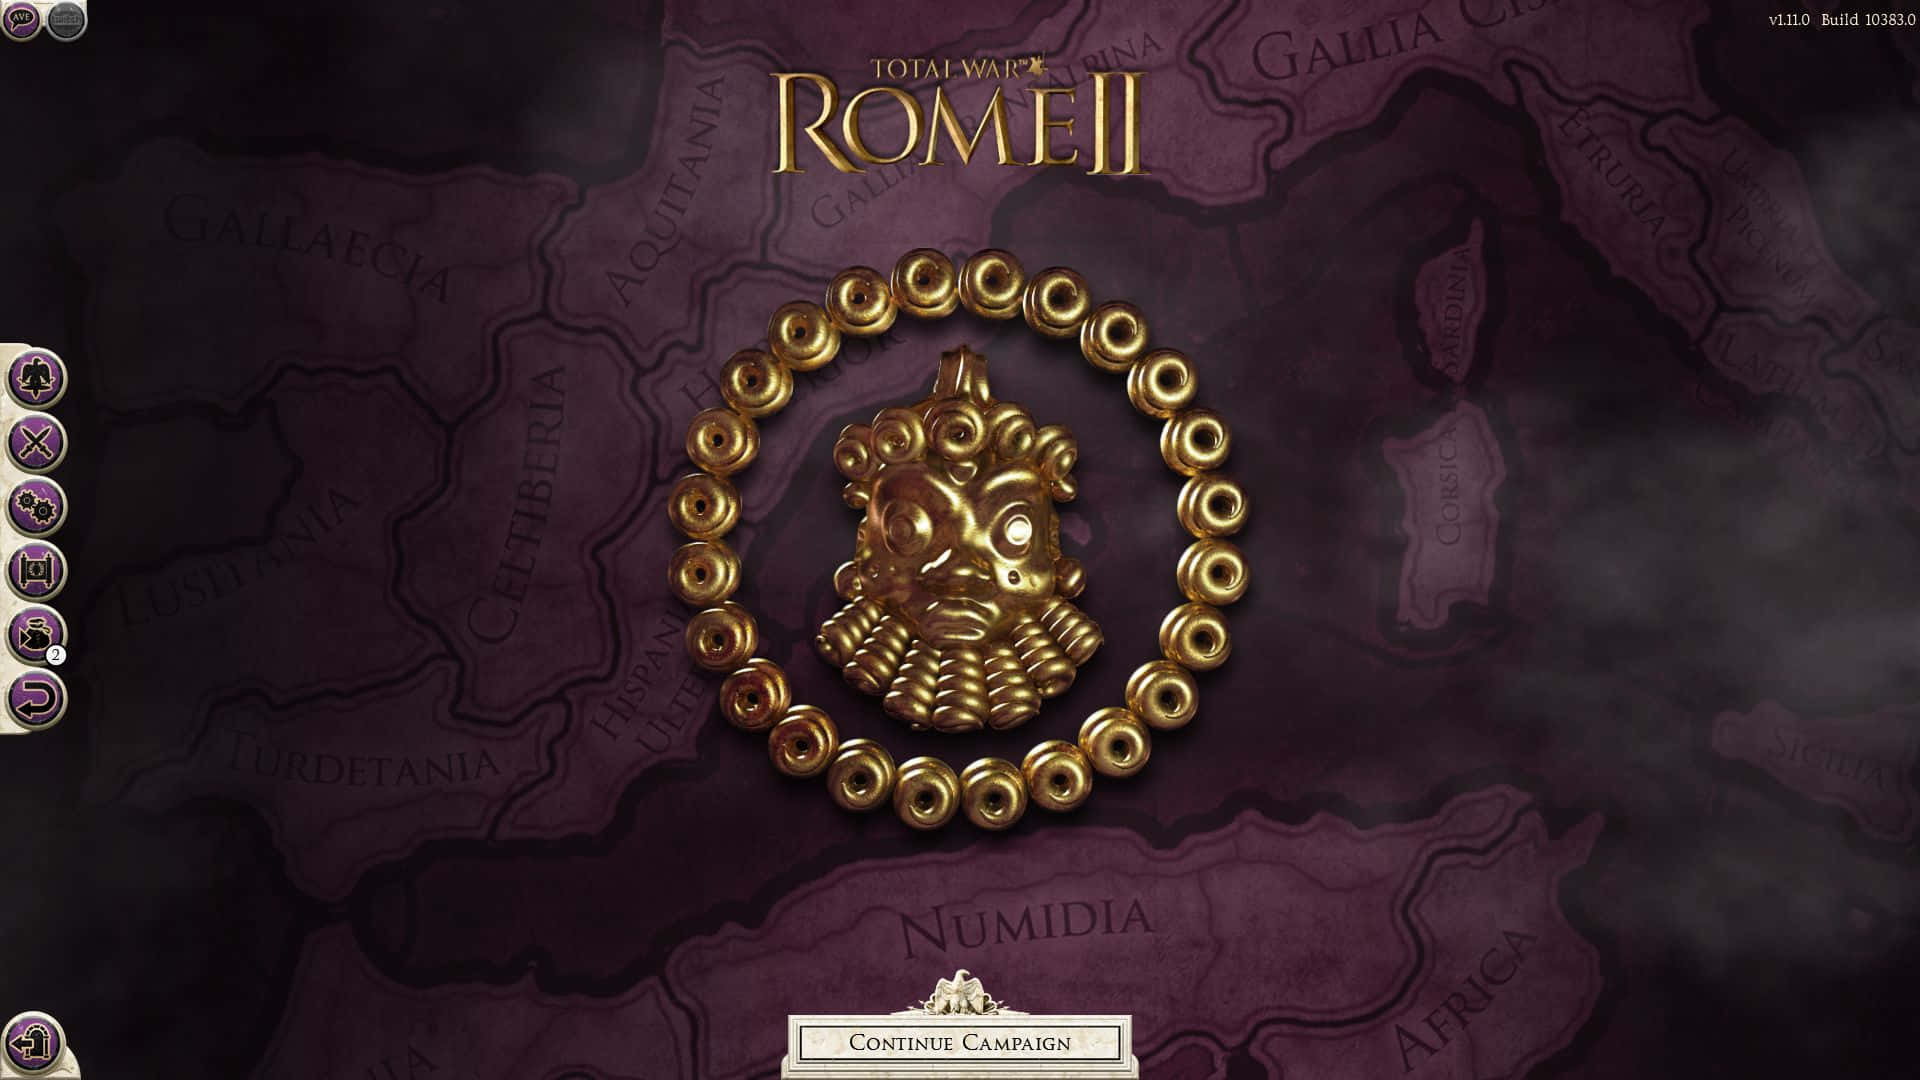 Prepare your armies, the battle of Total War: Rome 2 is about to begin!